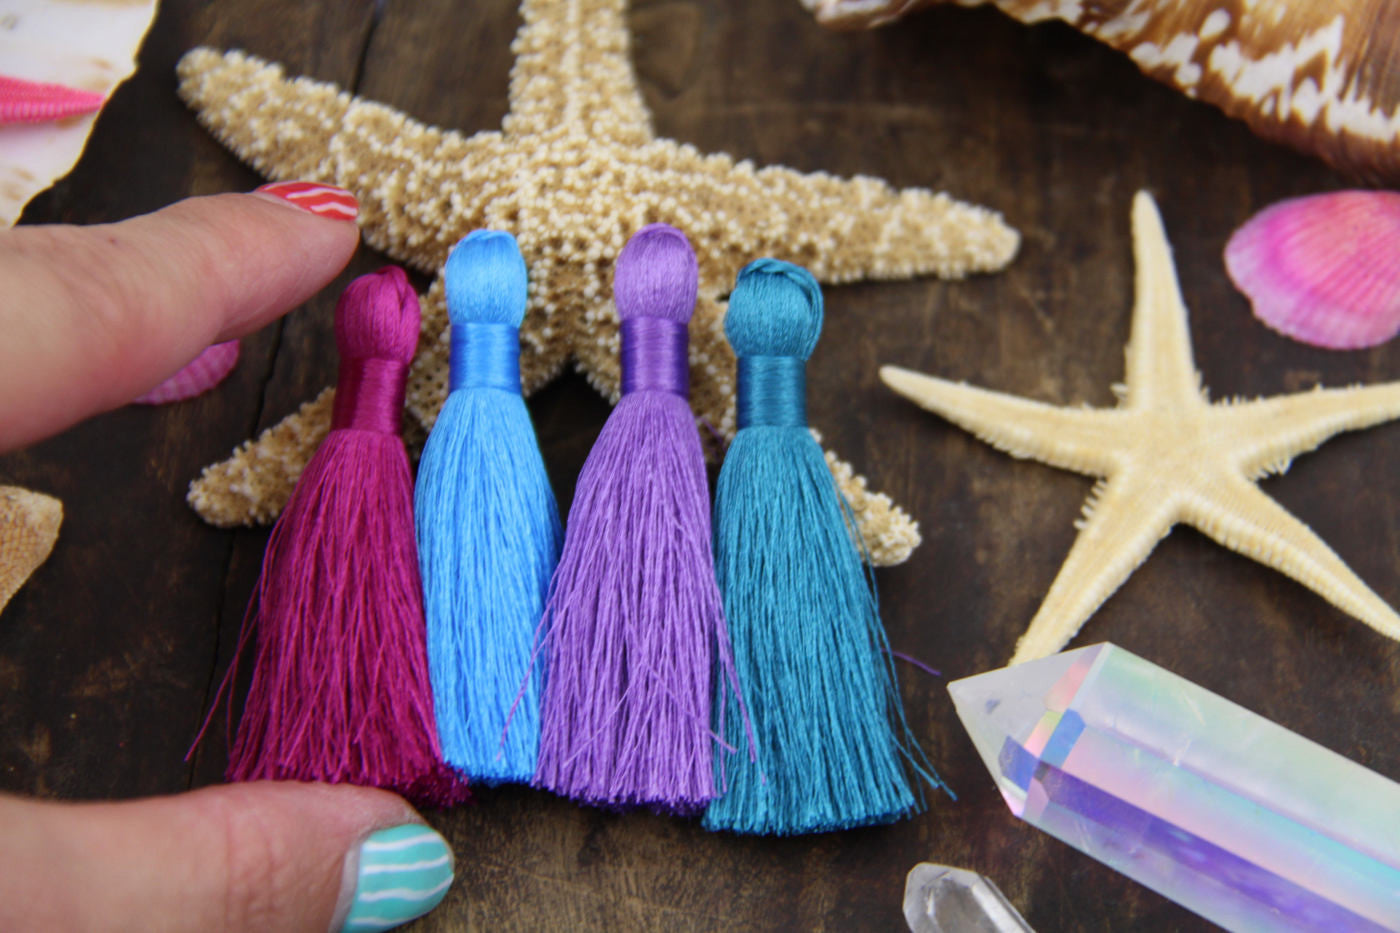 Mermaid Mix Summer Colors 2" Inch Silky Tassels, Jewelry Making Supply